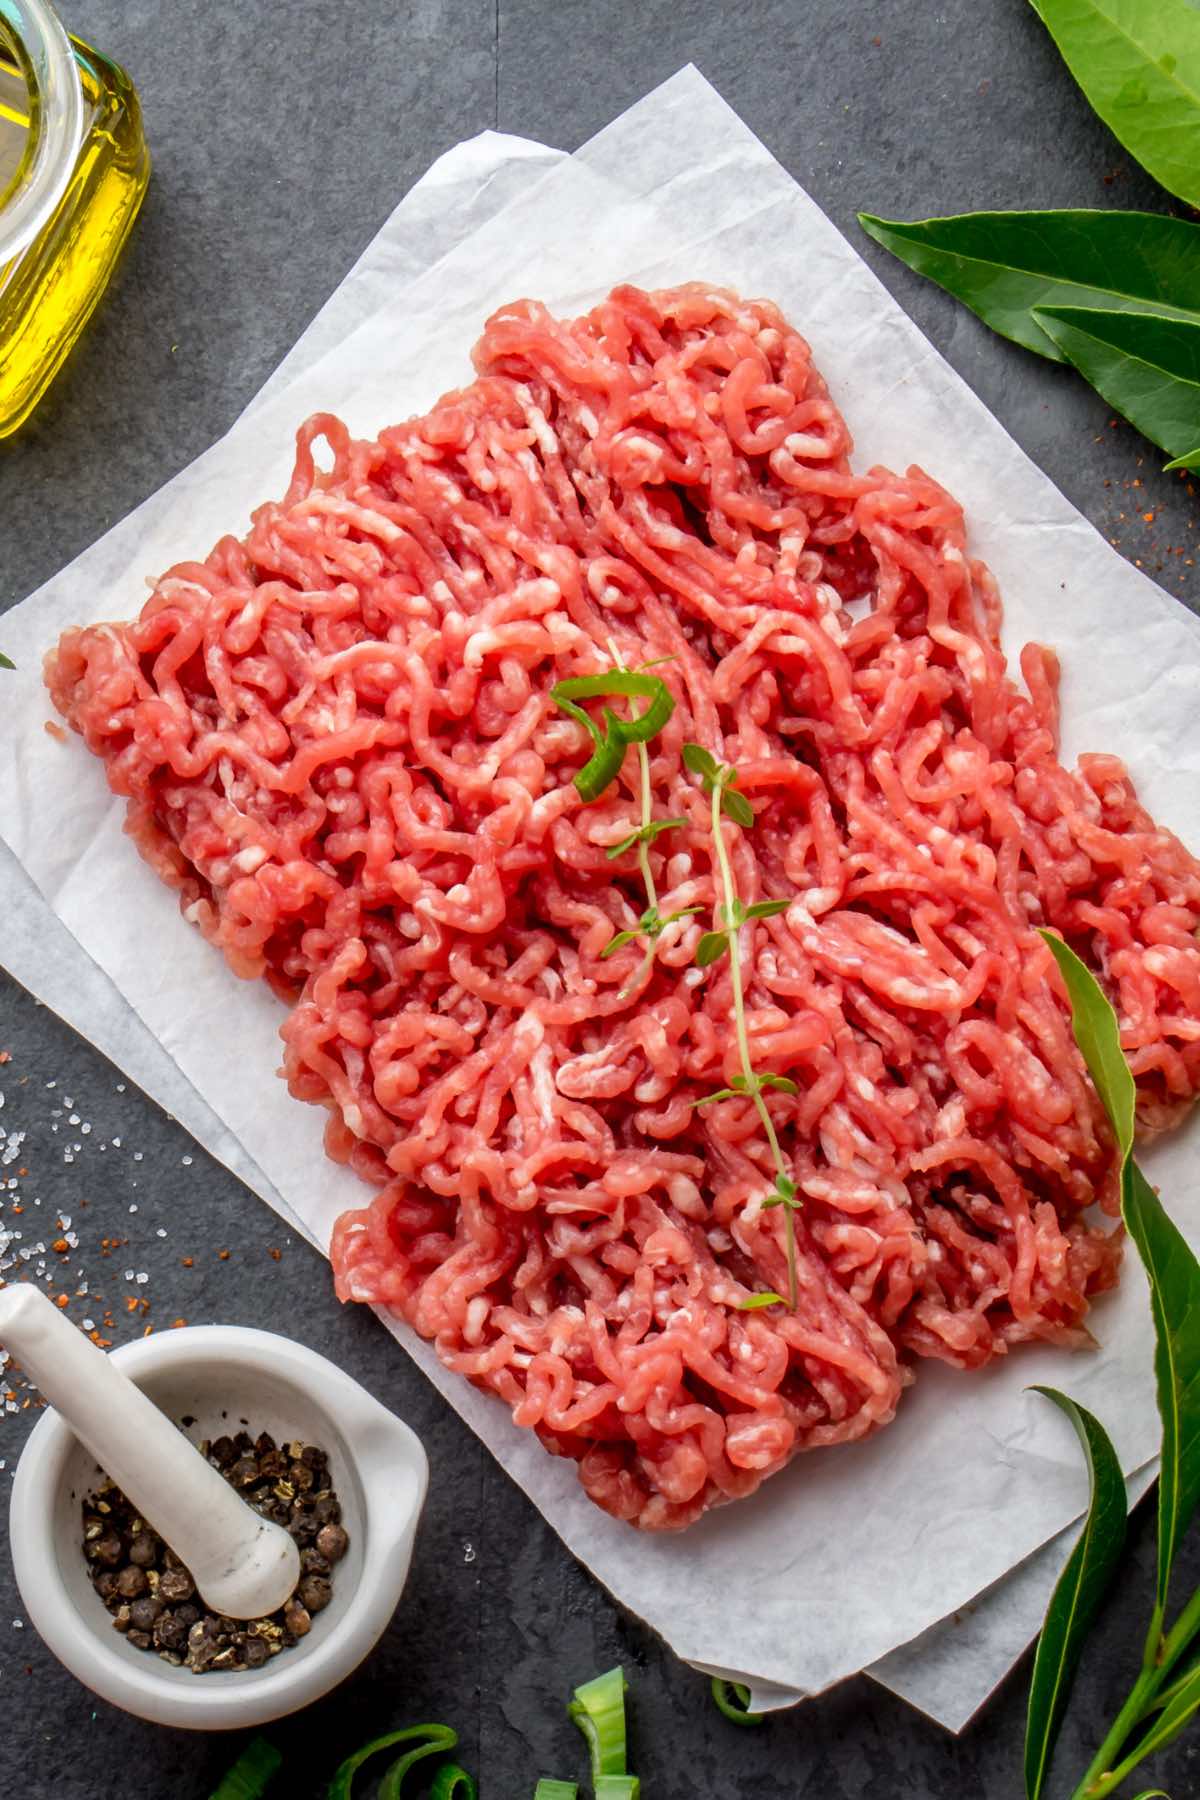 how long cooked ground meat in fridge